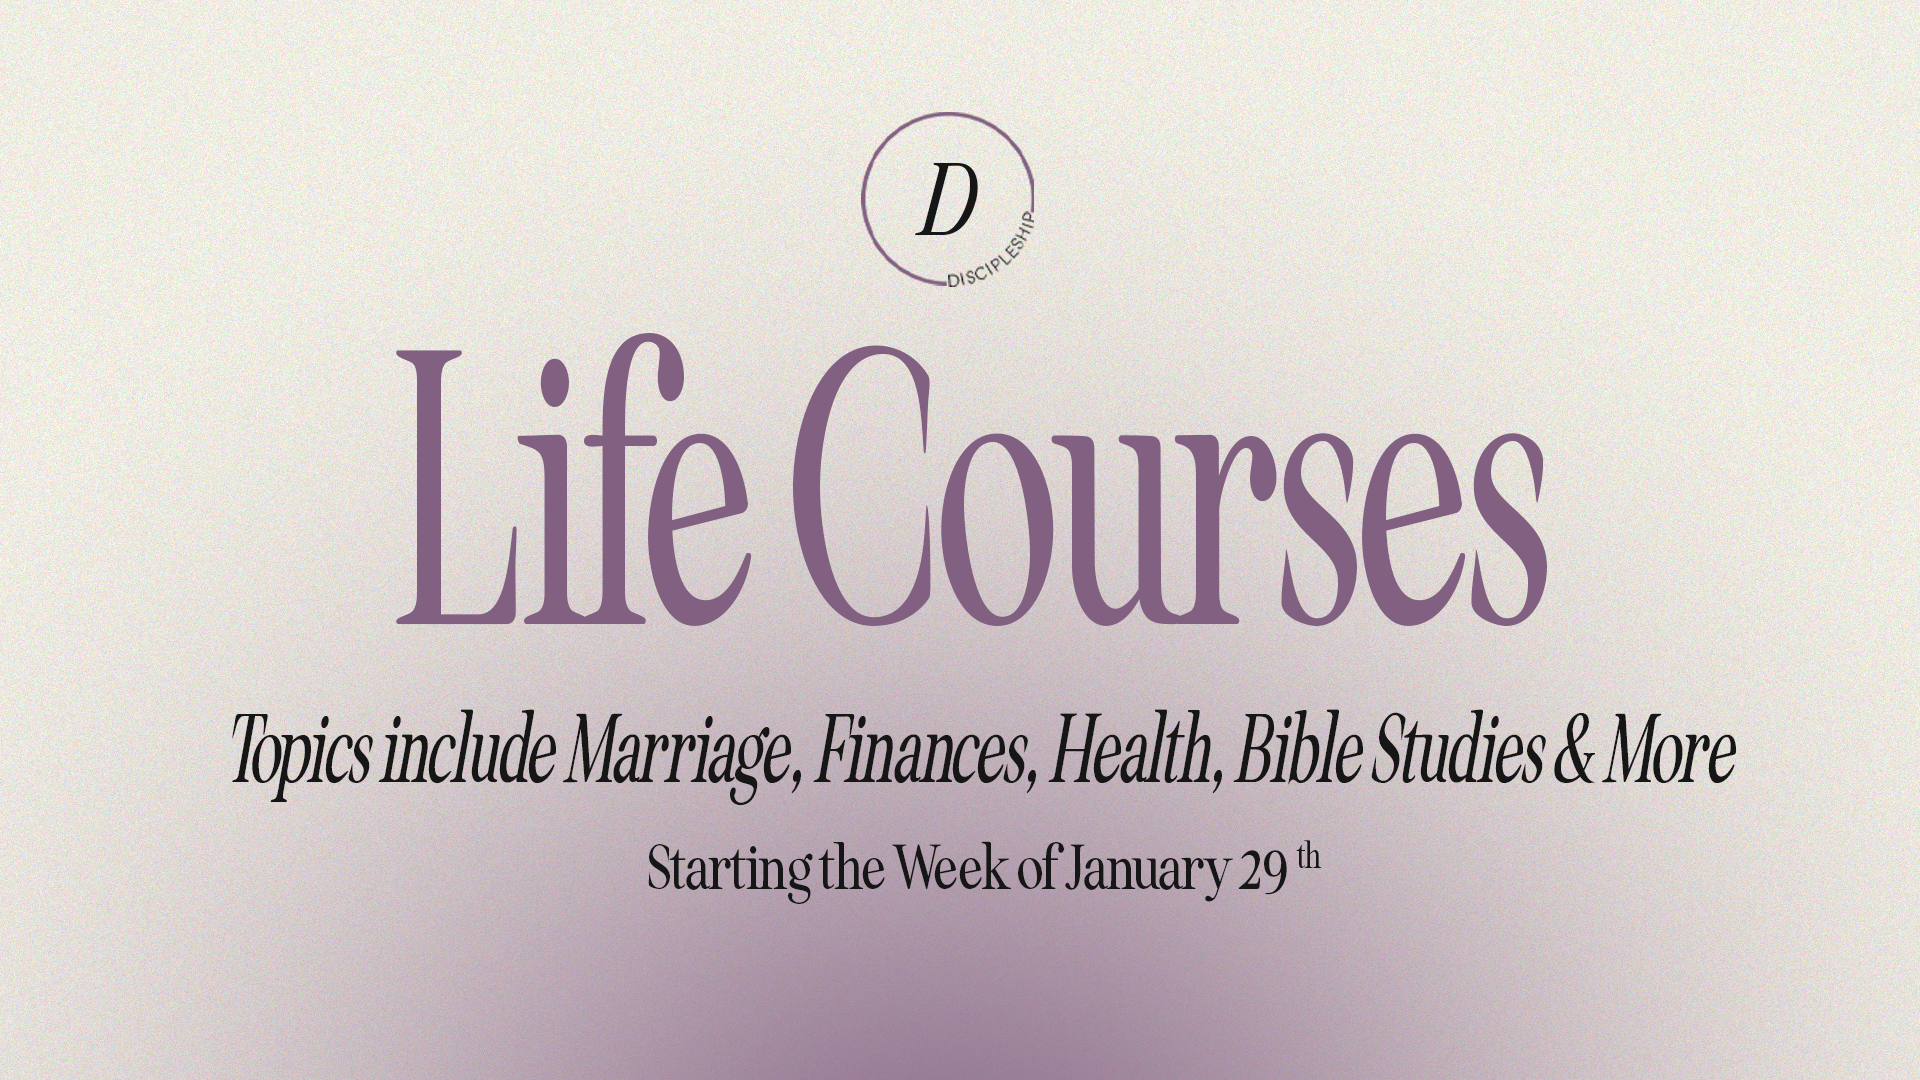 Life Courses at the Gwinnett campus